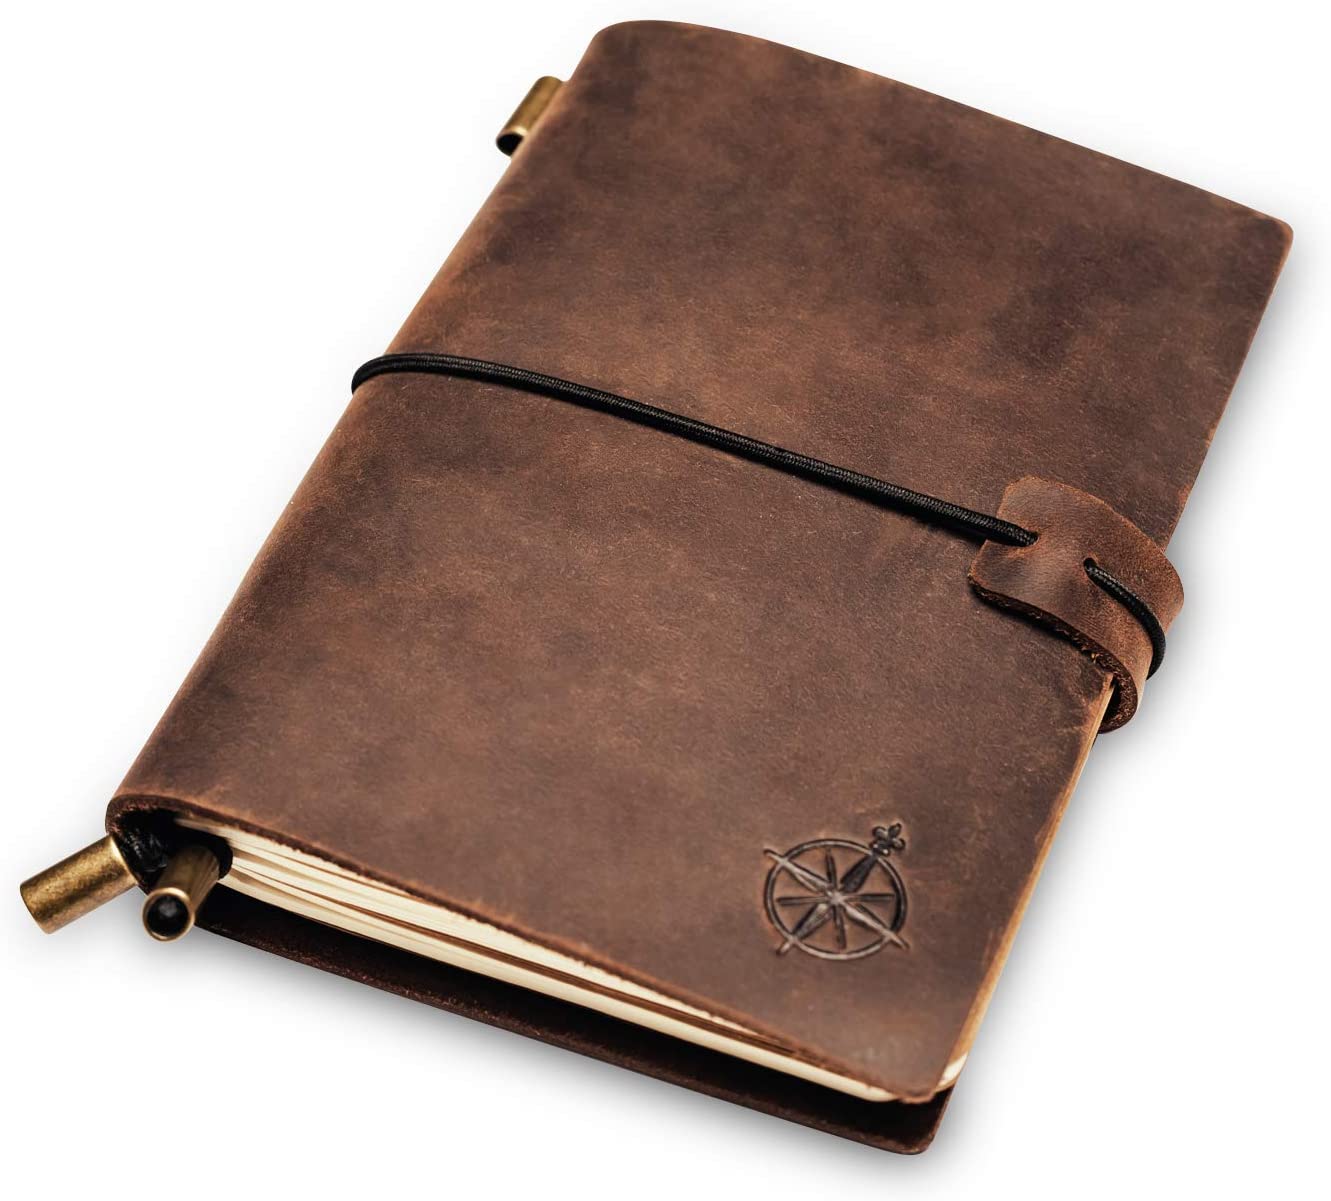 Wanderings Leather Pocket Notebook available on Amazon.